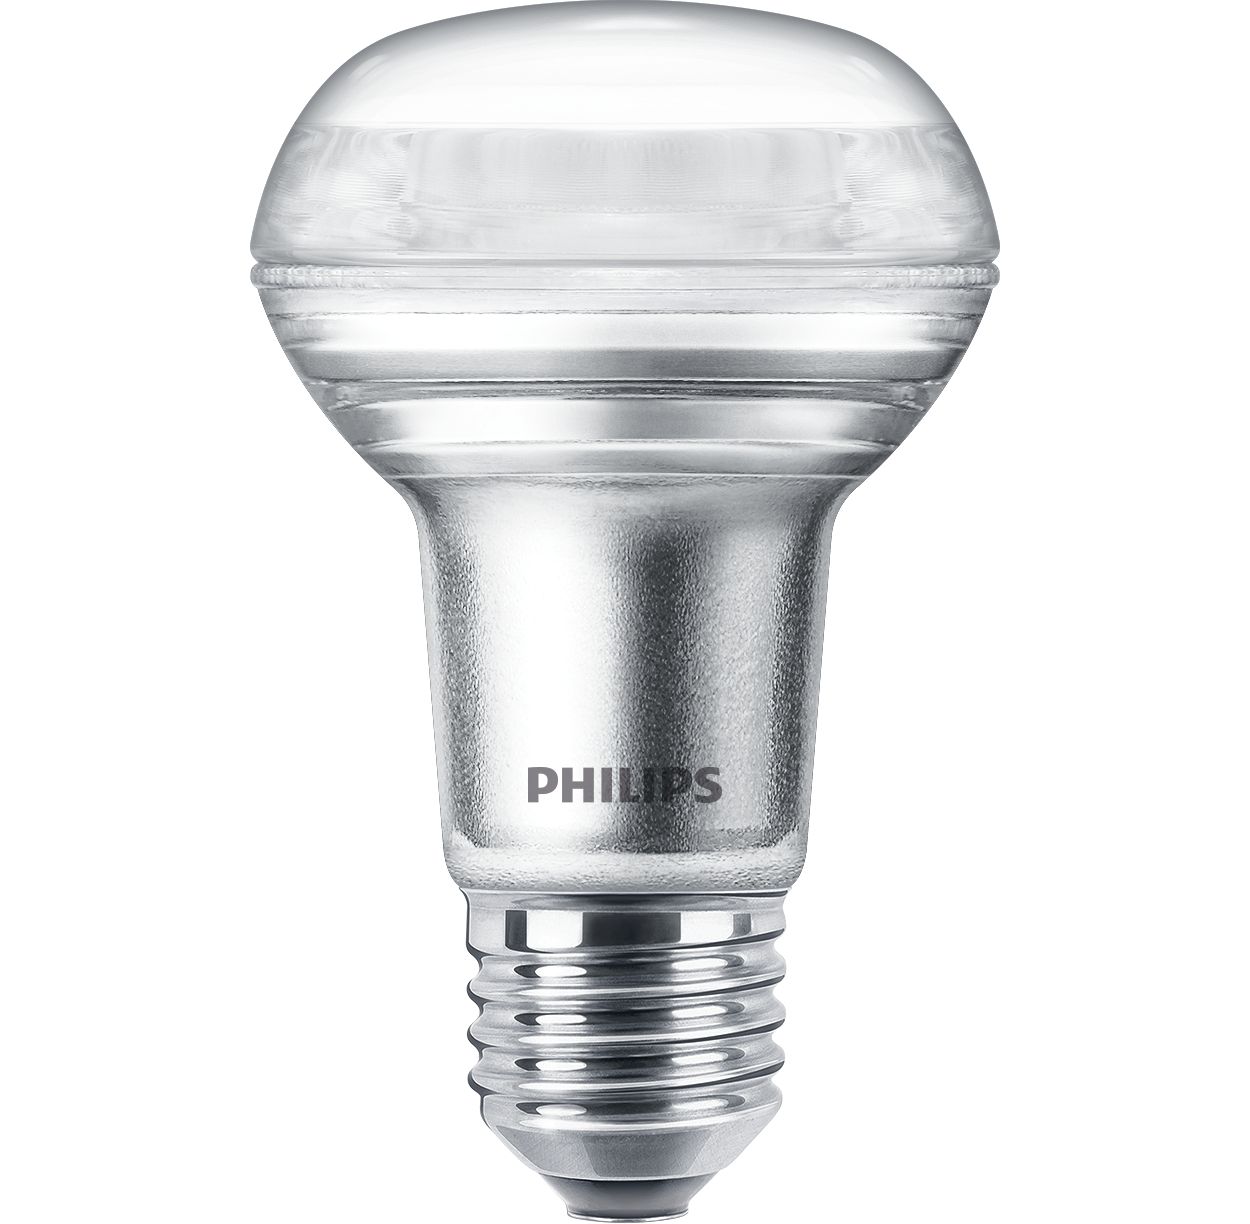 Durable LED light with a focused bright beam